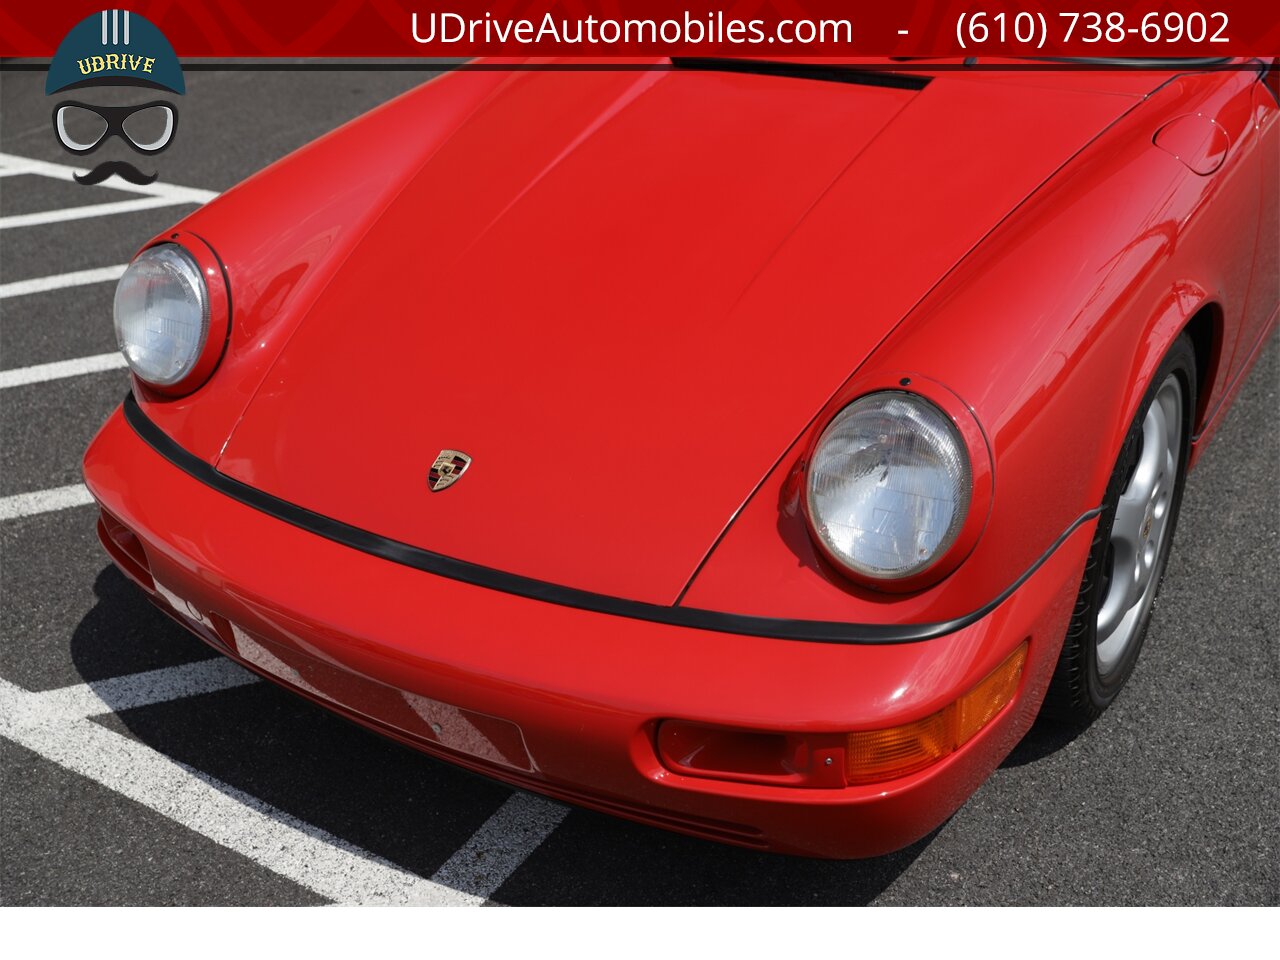 1989 Porsche 911 Carrera 4 964 C4 5 Speed Engine Rebuild  $40k in Service History Cup 1 Wheels - Photo 9 - West Chester, PA 19382